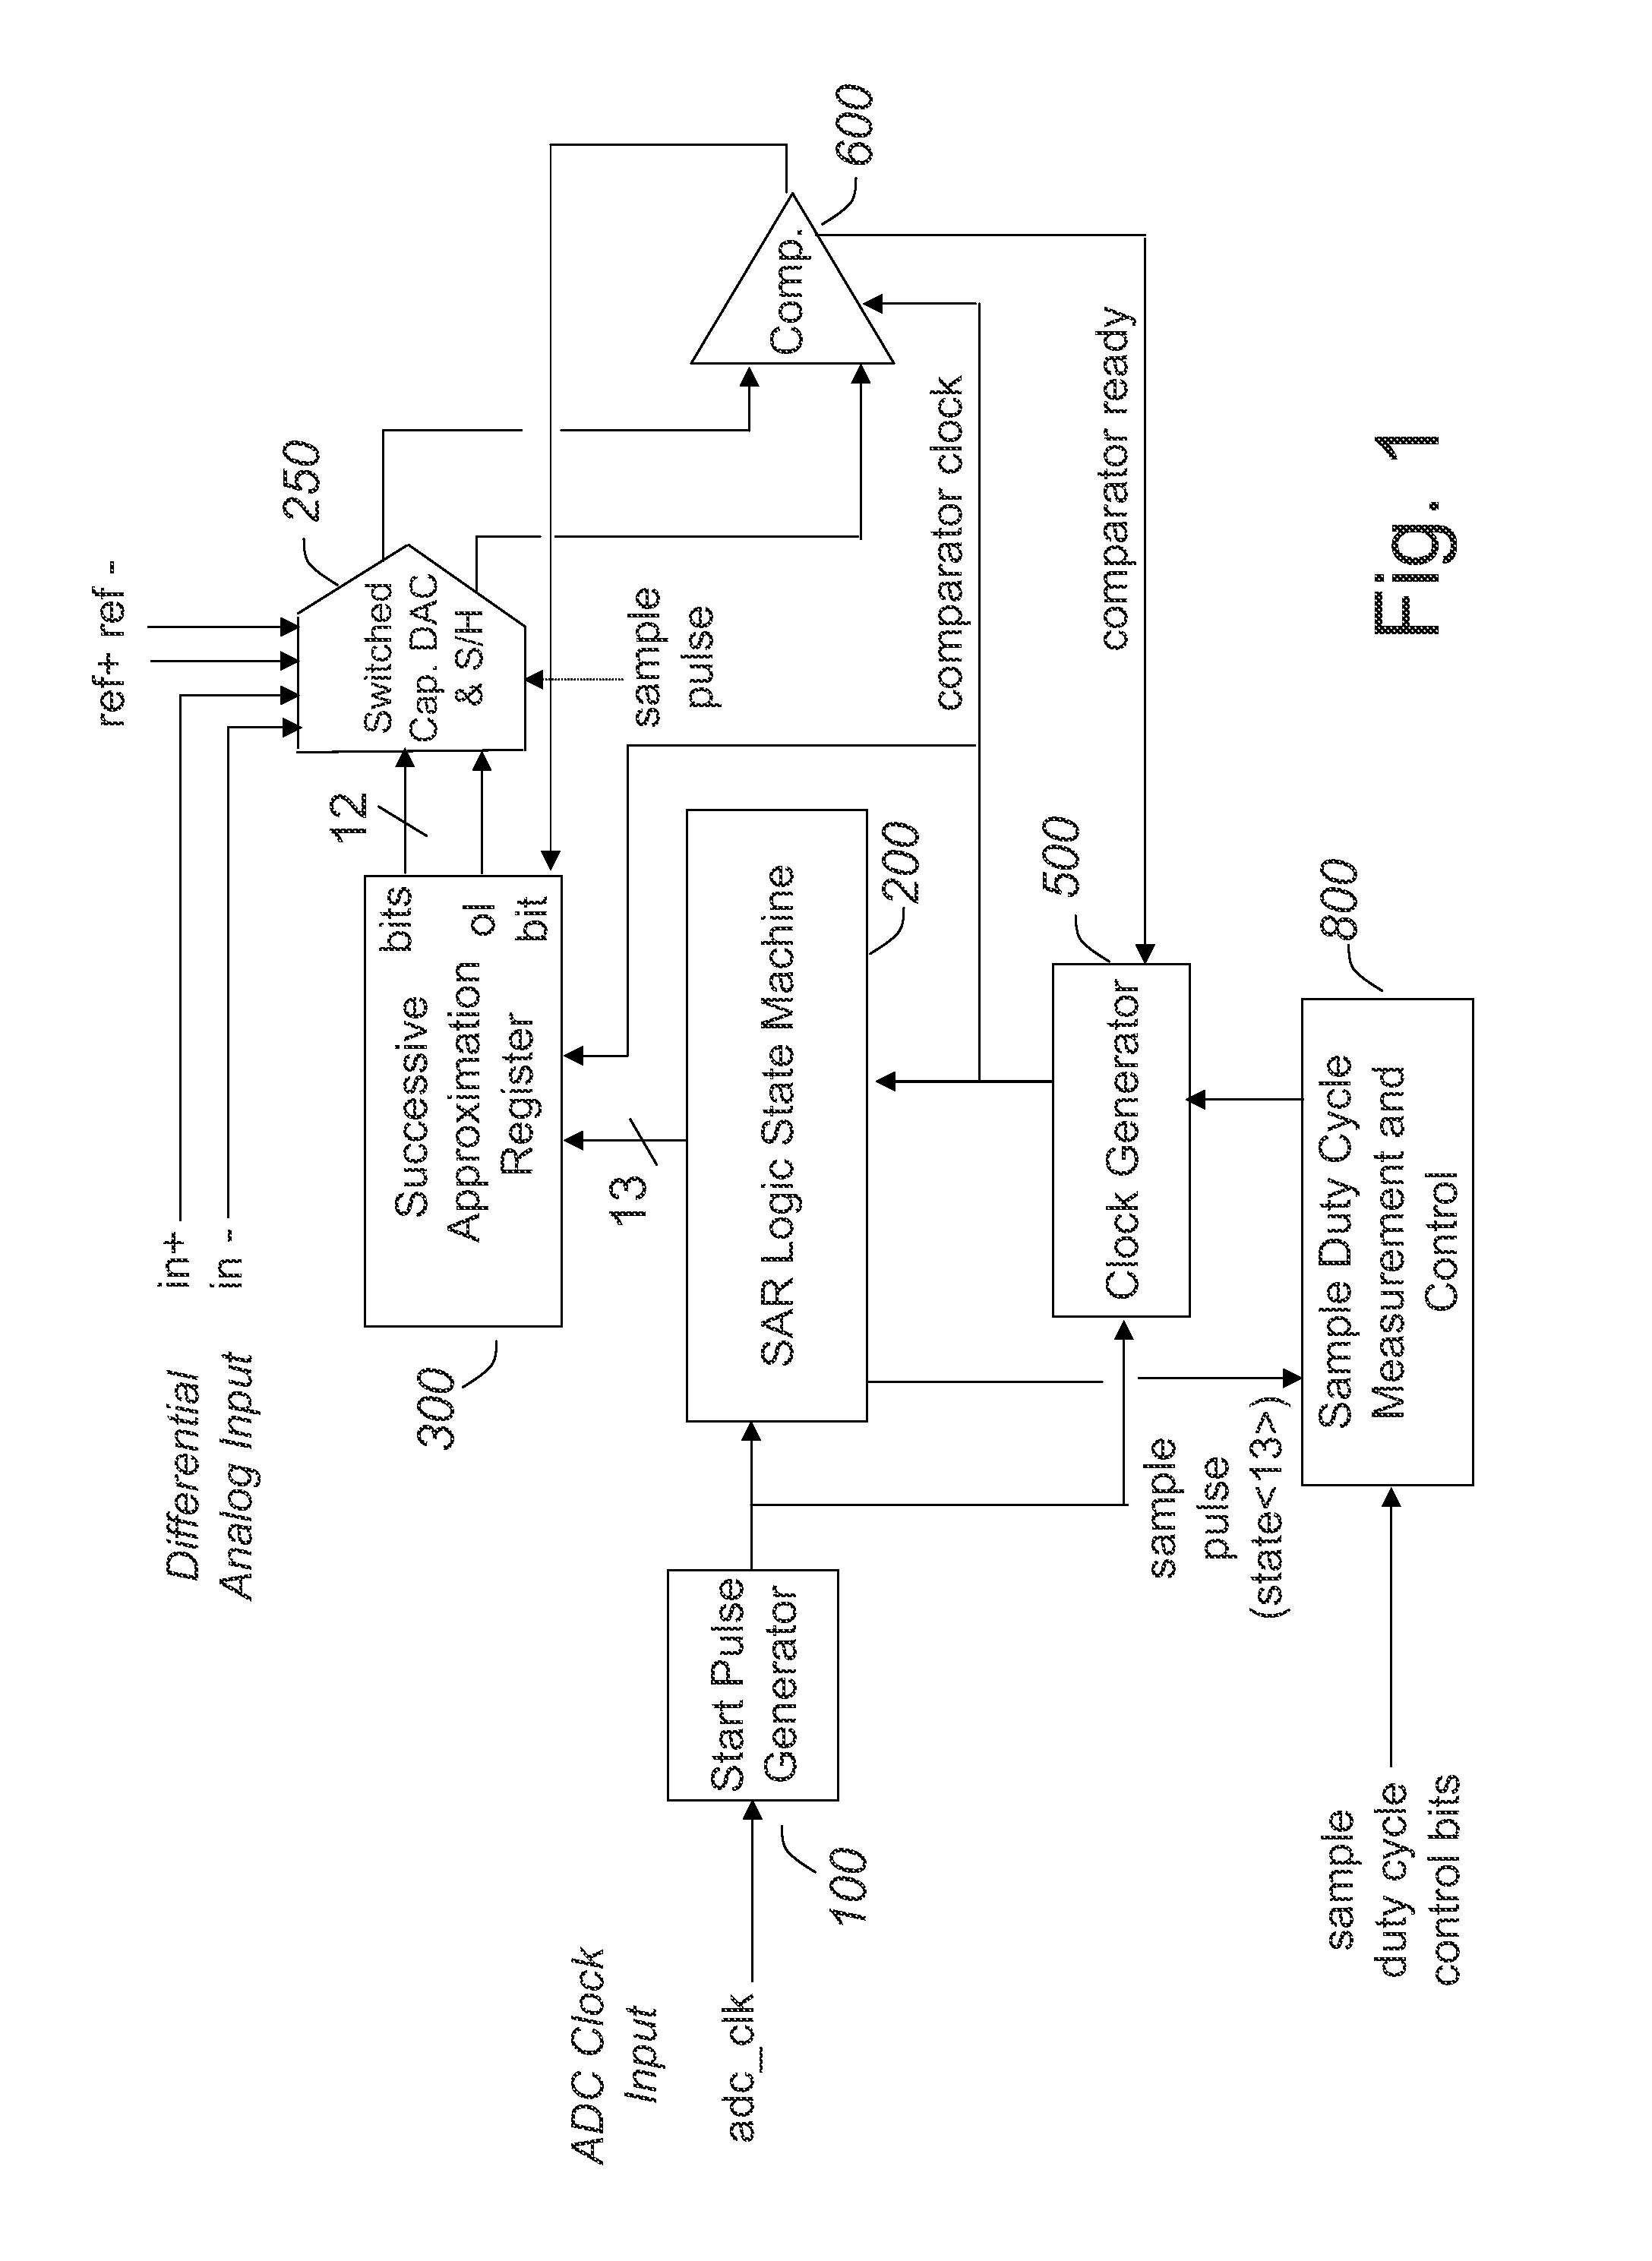 System and method for adaptive timing control of successive approximation analog-to-digital conversion